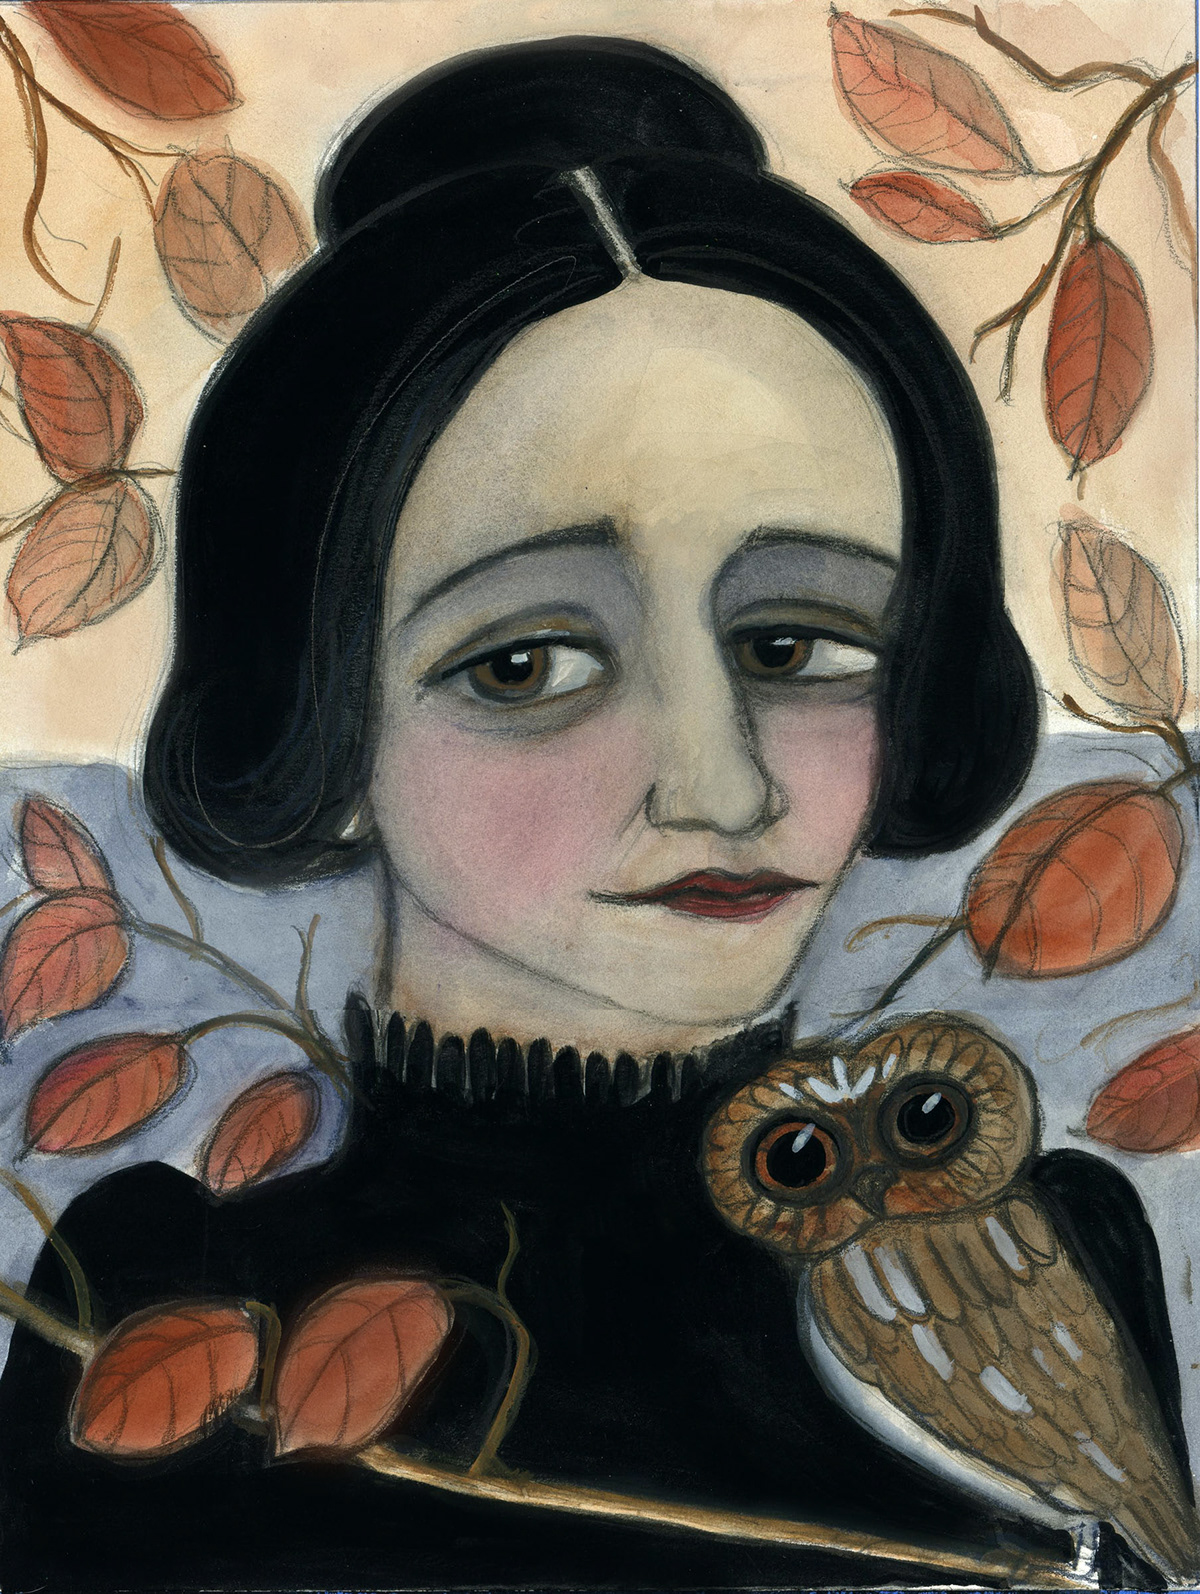 My Victorian inspired portrait for the Autumn season. The Fall of the Dead Leaves by Debra 
Styer